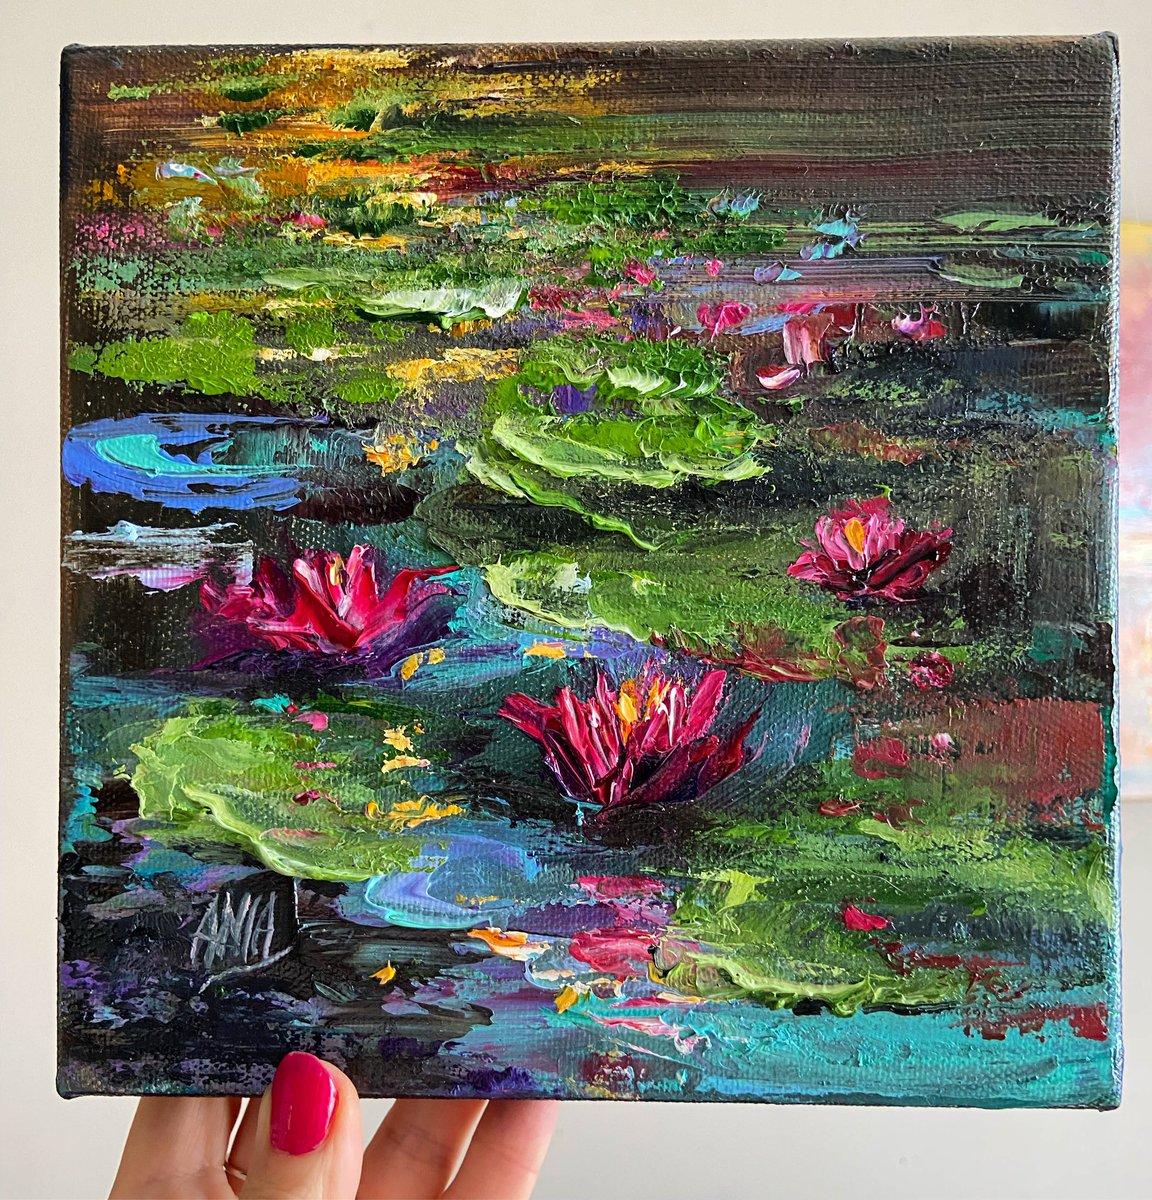 🎨💧”Enchanting Water Whispers” 
My new piece exudes a sense of inner peace, love, and power. 💕🌿 🌟✨ #InnerPeace #LoveAndPower #ArtisticReflections #WaterLiliesMagic  #oilpainting